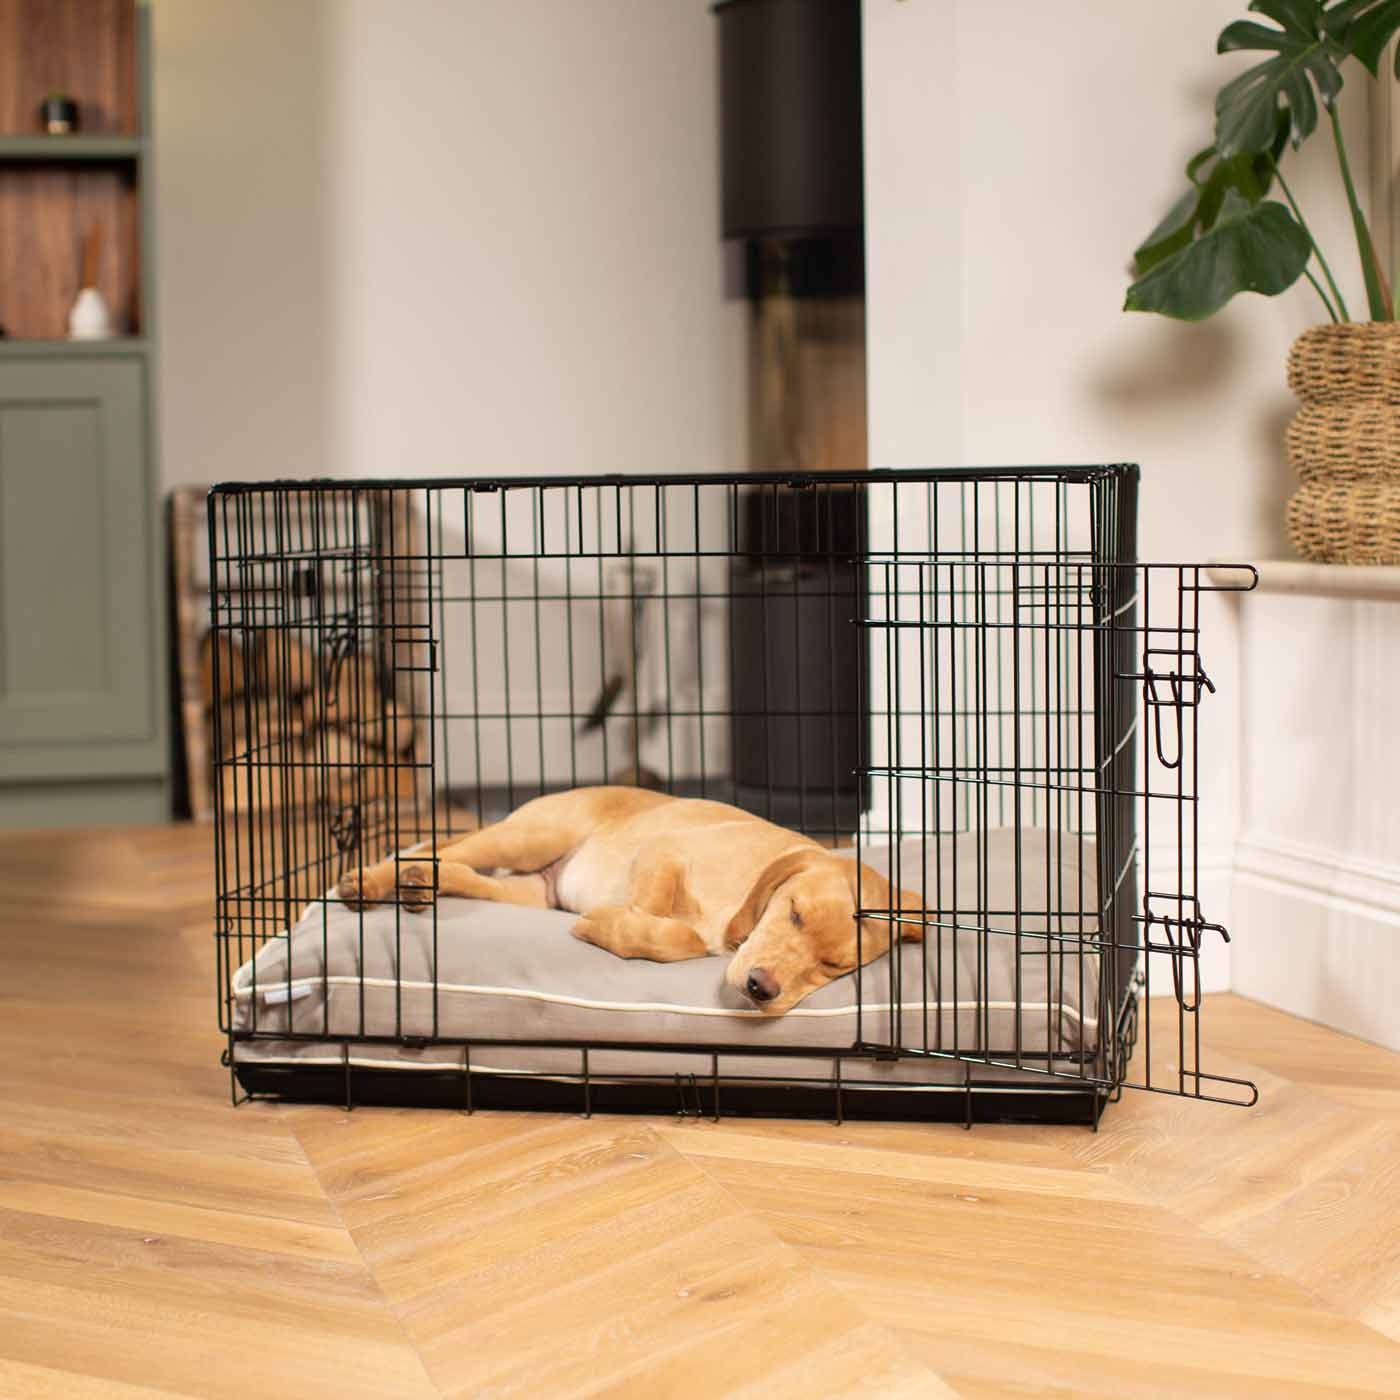 Luxury Dog Cage Cushion, Savanna Stone, part of the savanna collection. The Perfect Dog Crate Accessory, Available To Personalize Now at Lords & Labradors US